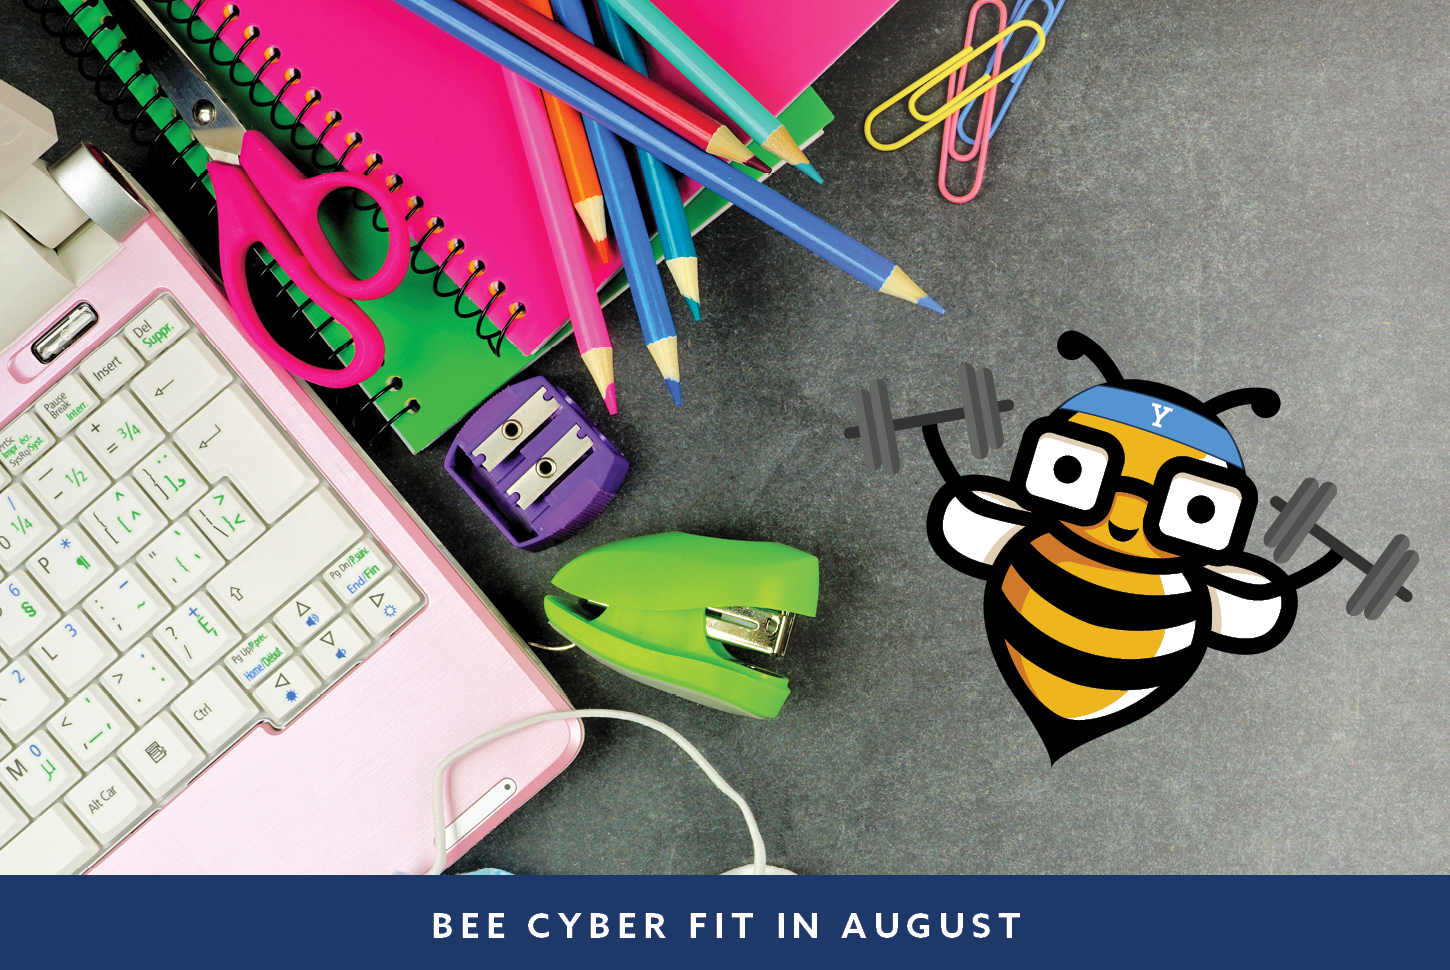 Laptop and school supplies with Bee Cyber Fit logo